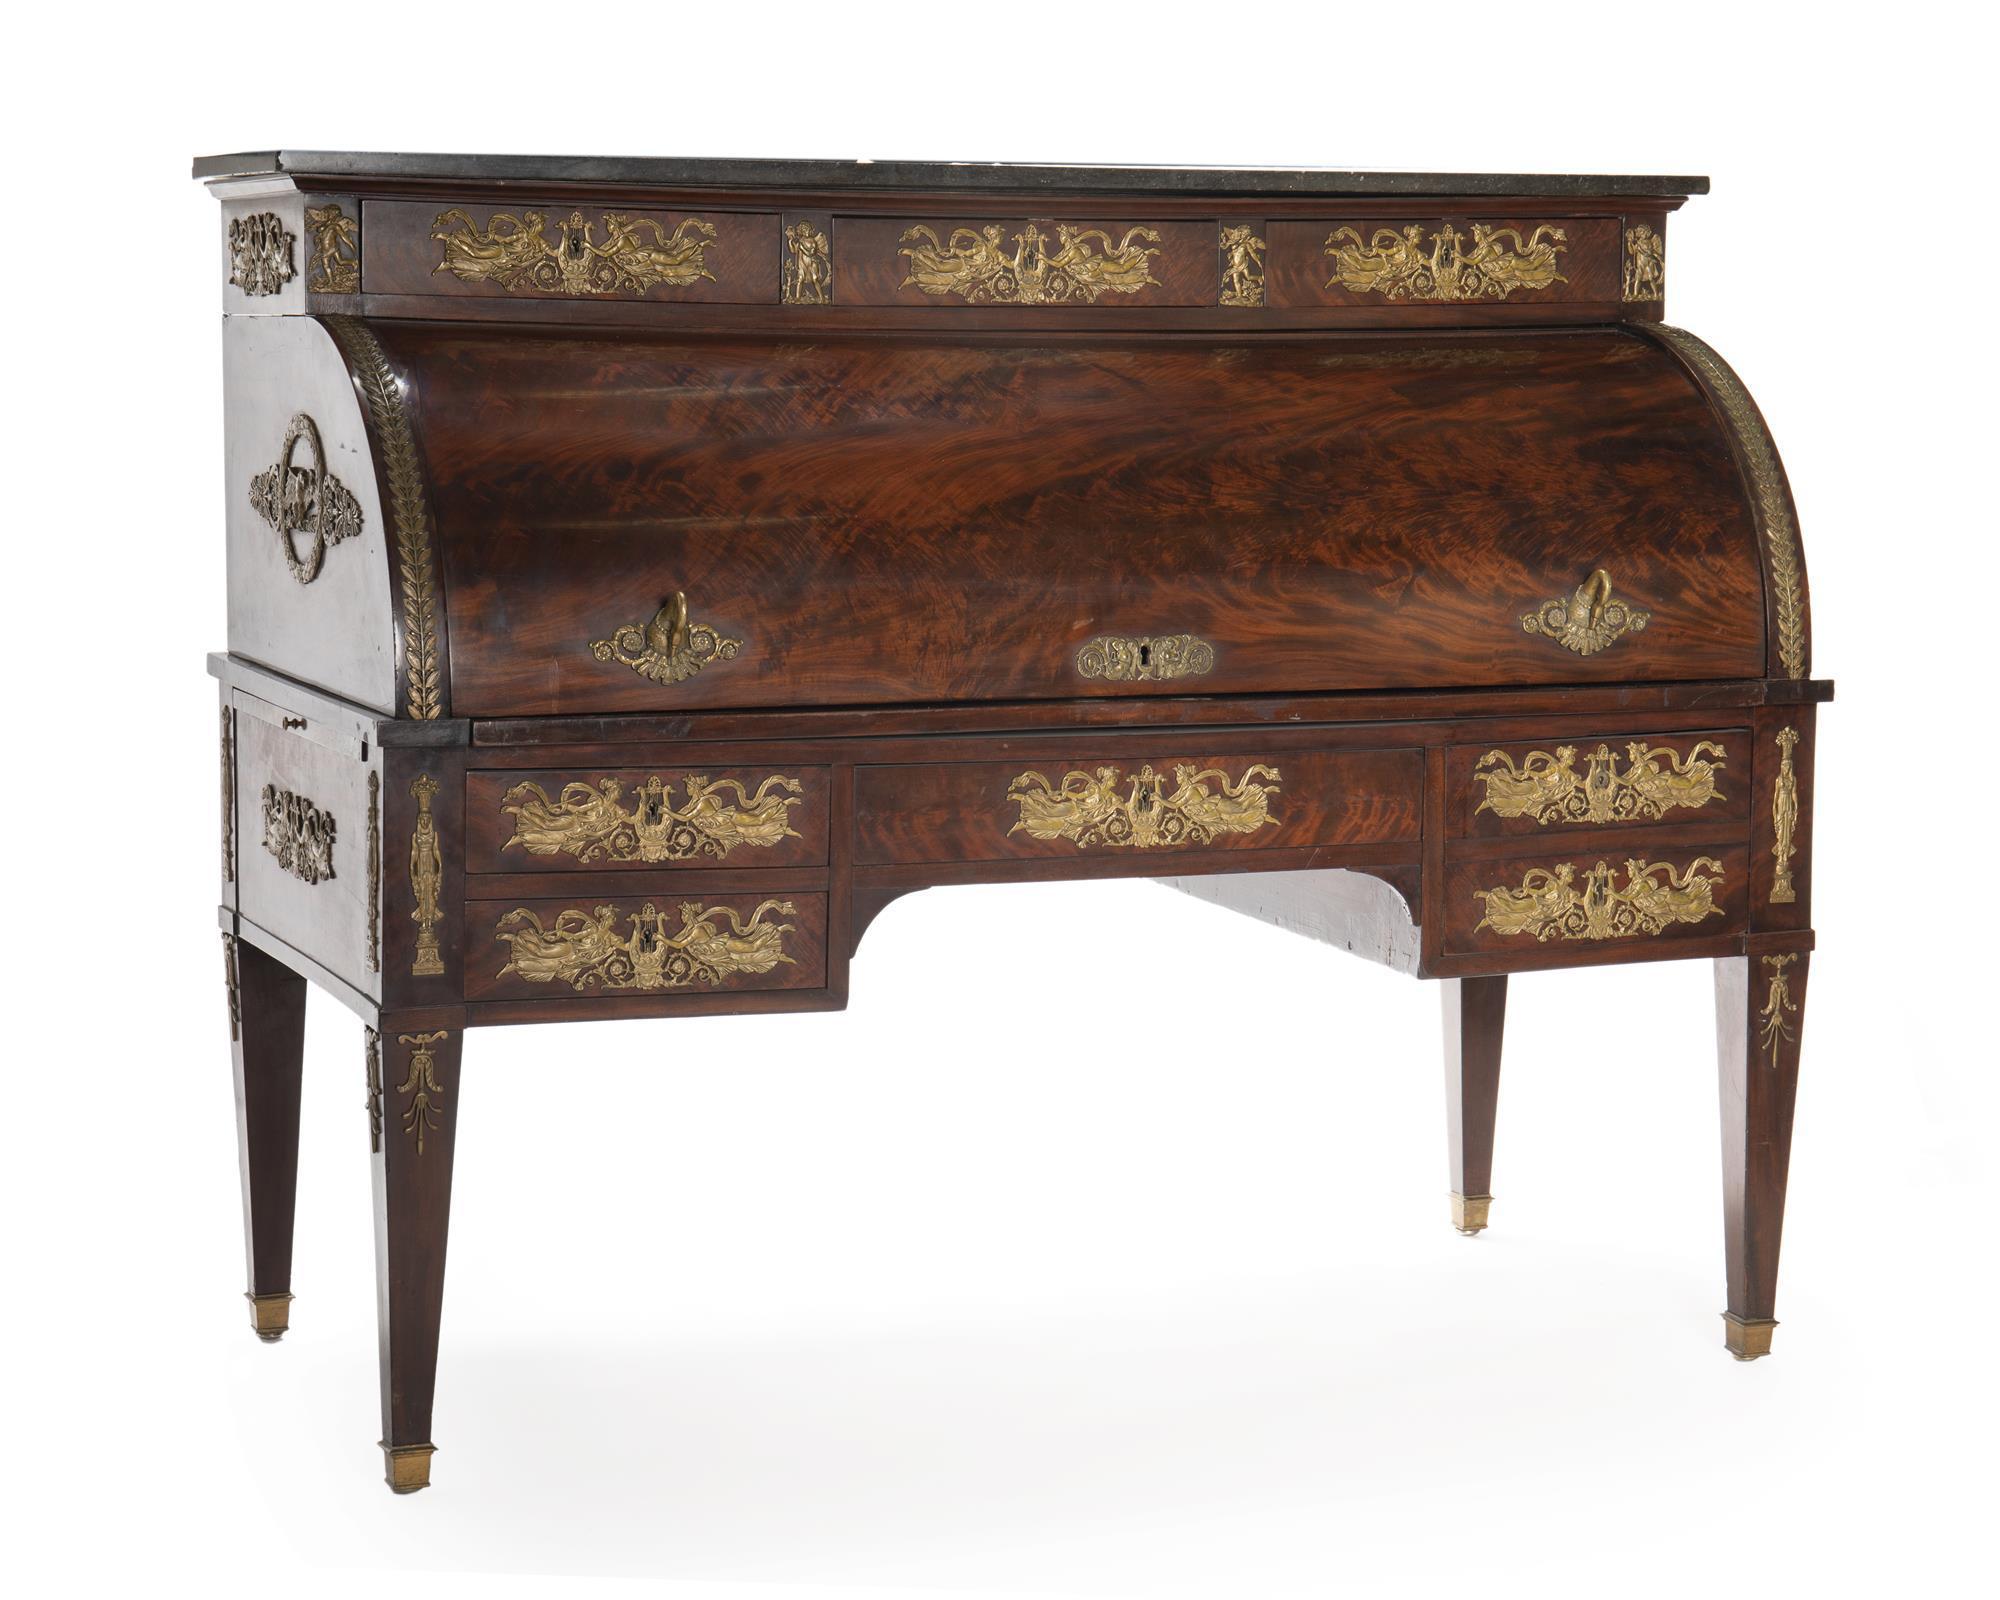 19th Century French Empire Style Mahogany Roll-Top Desk with Gilt Bronze-Mounted For Sale 3